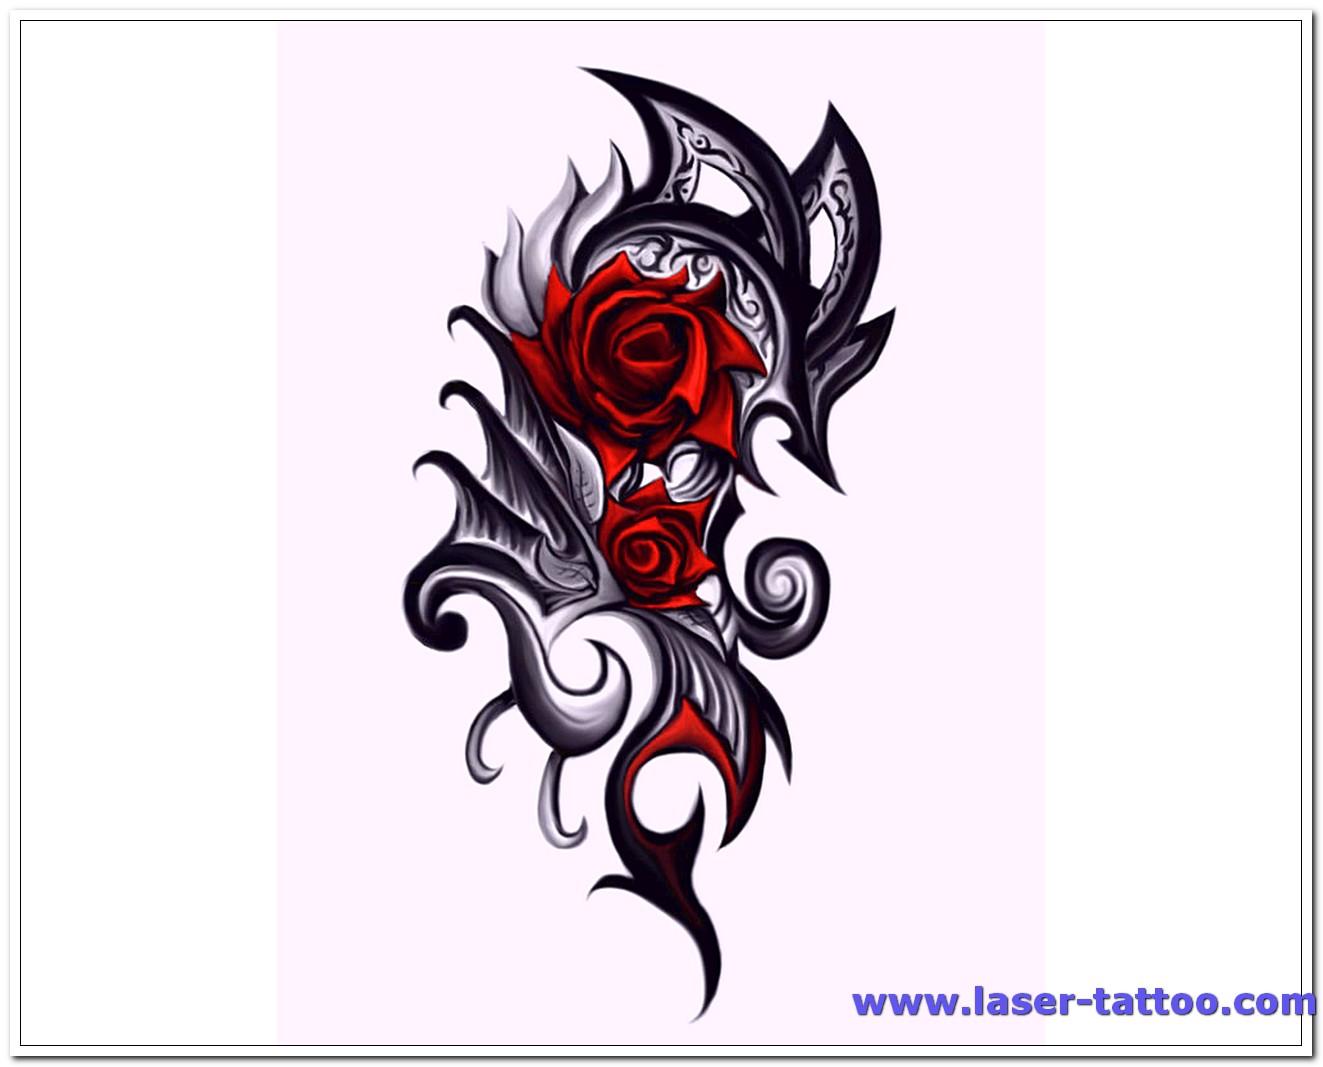 Black & Grey Tribal Background With Red Roses Tattoo Design